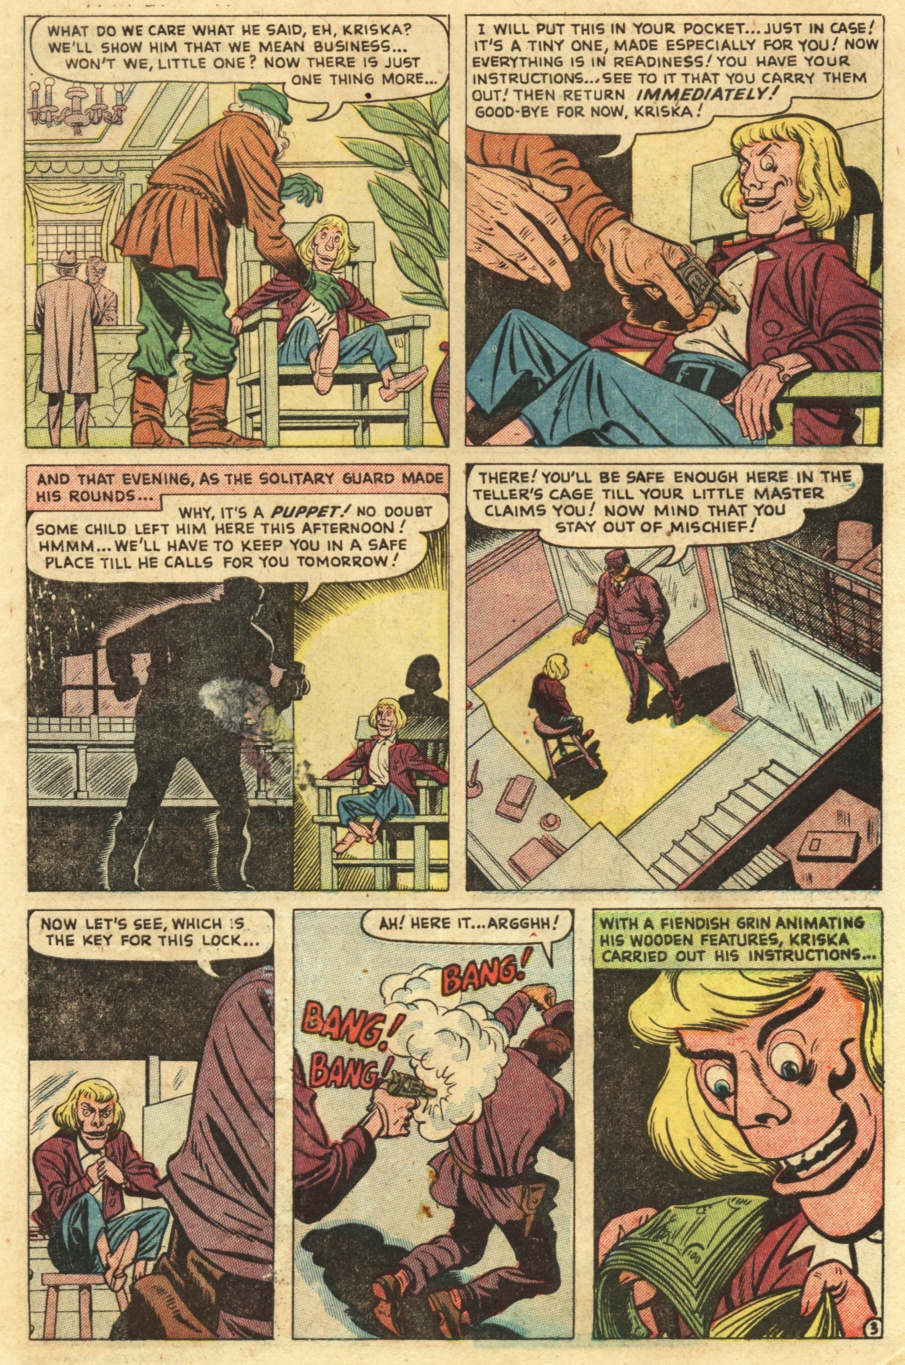 Marvel Tales (1949) 97 Page 26